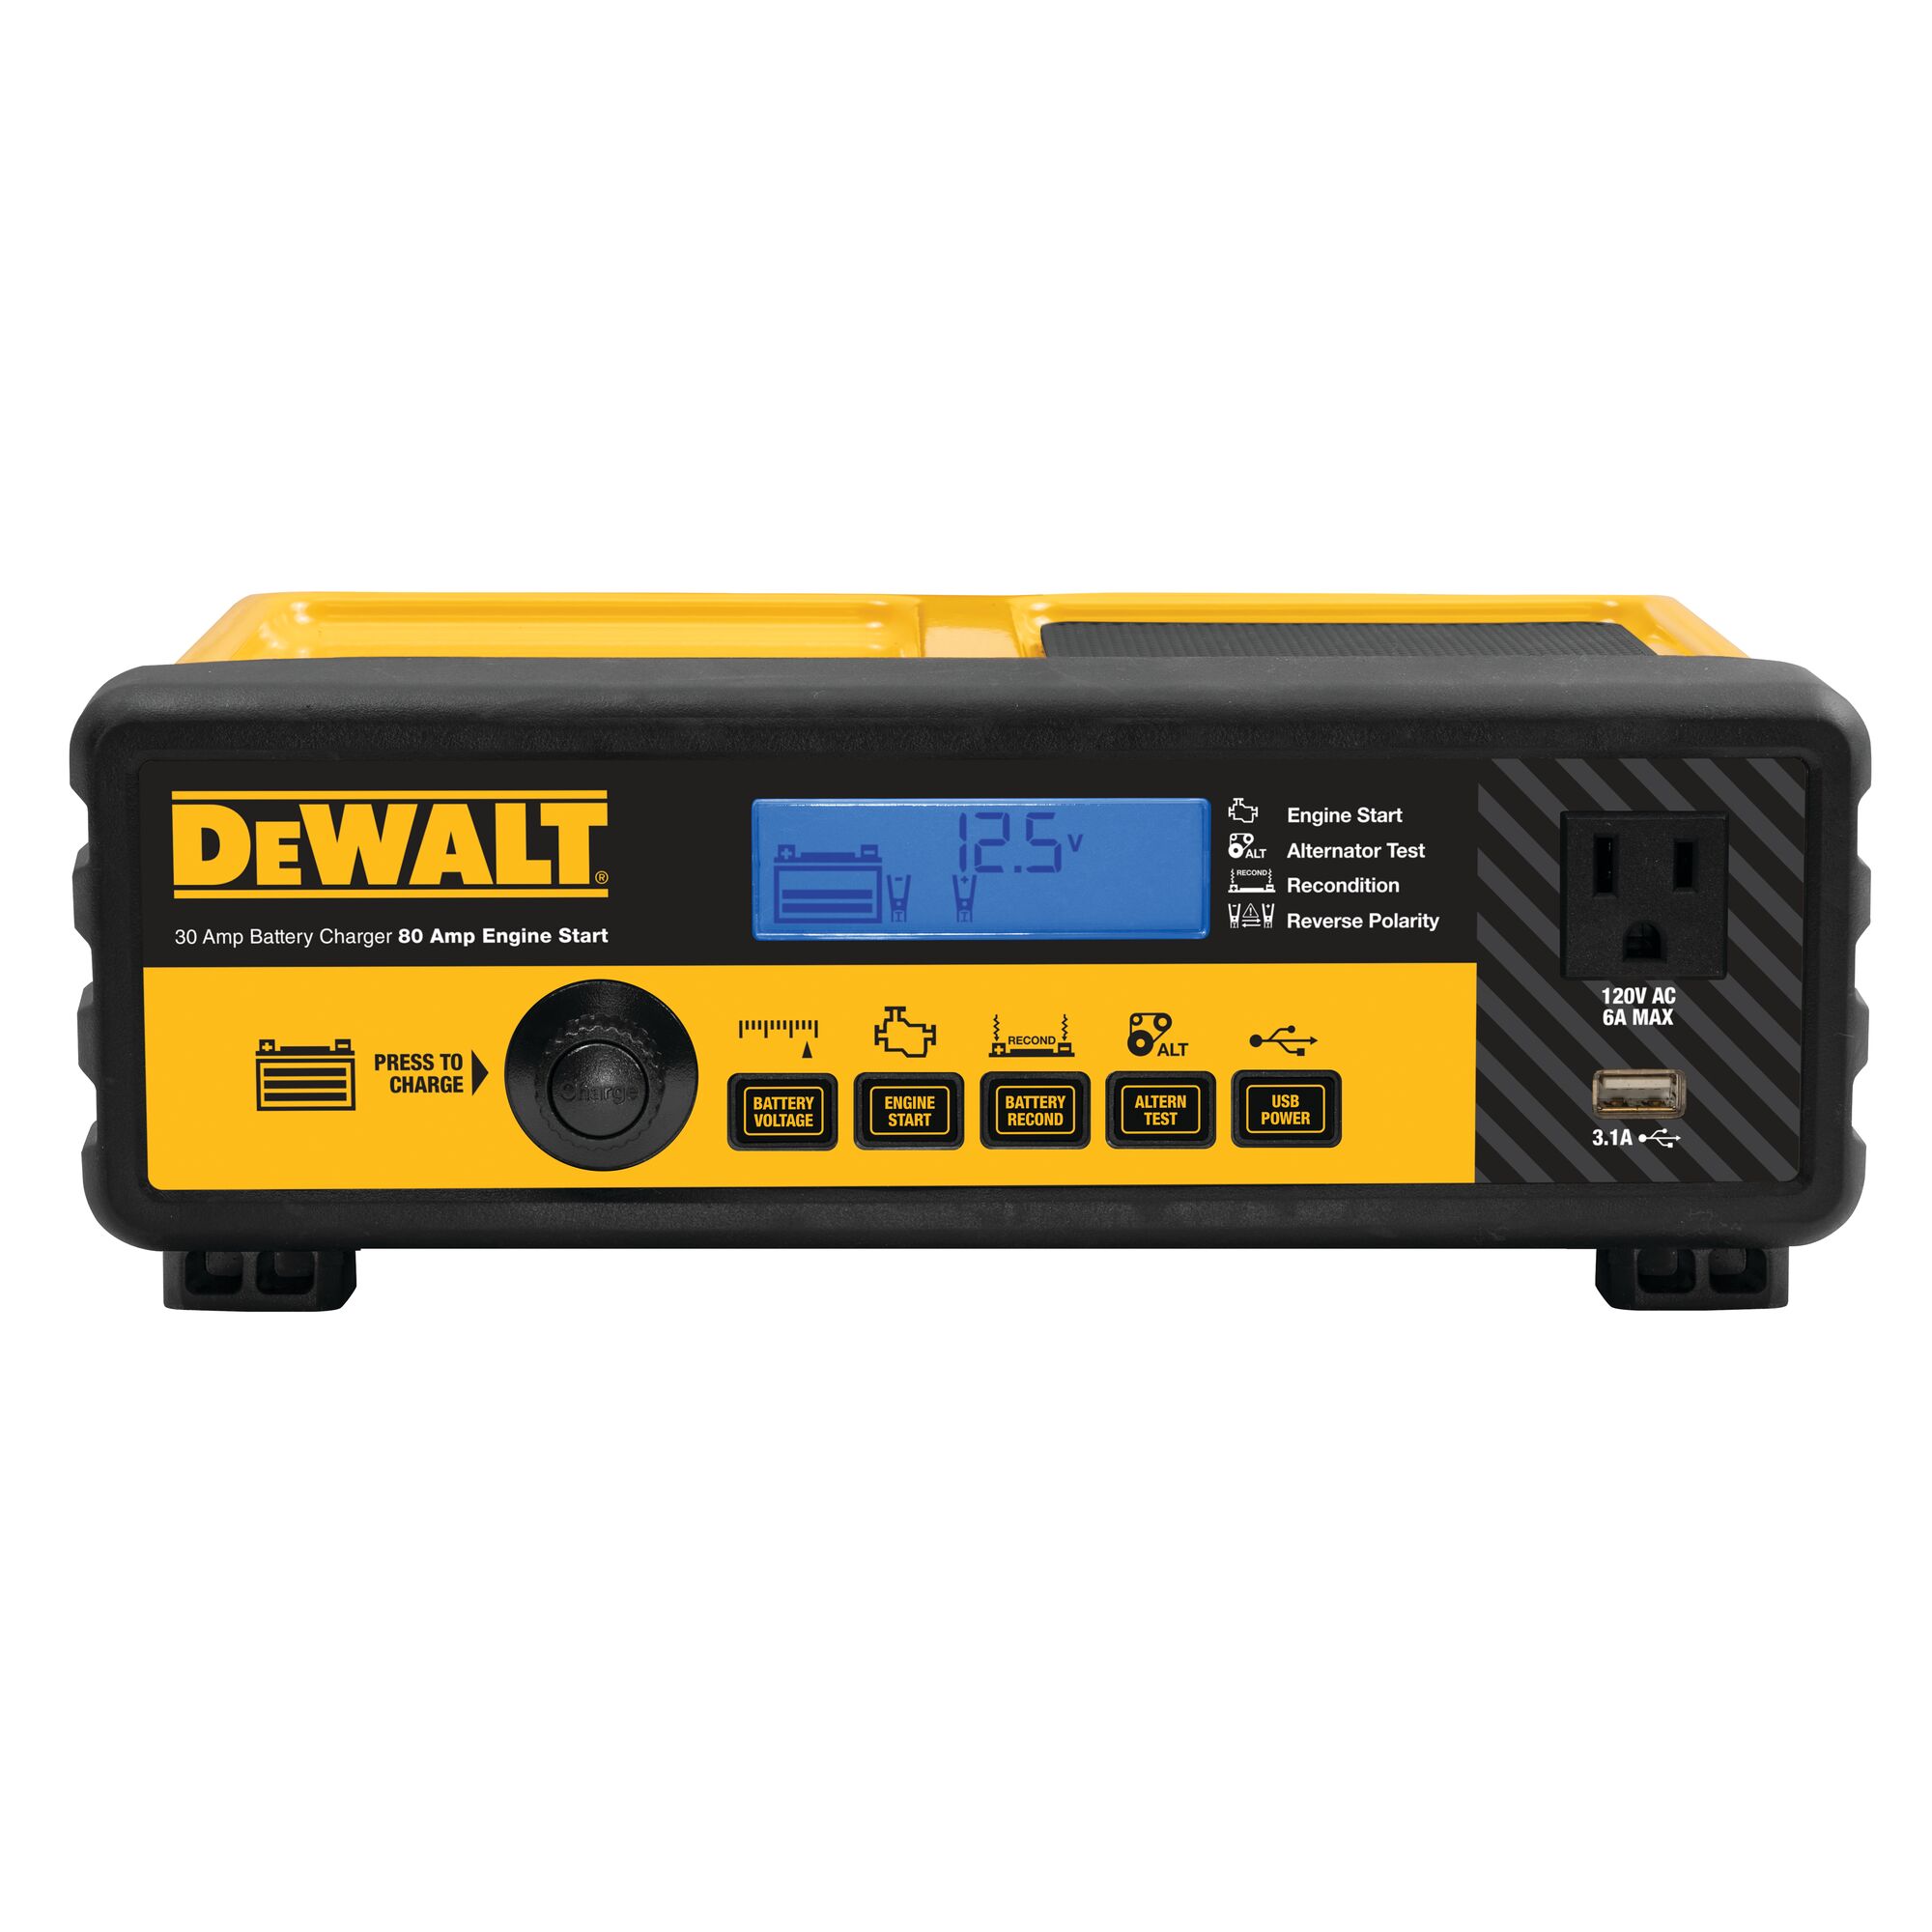 How Many Watts Does a Dewalt Battery Charger Use